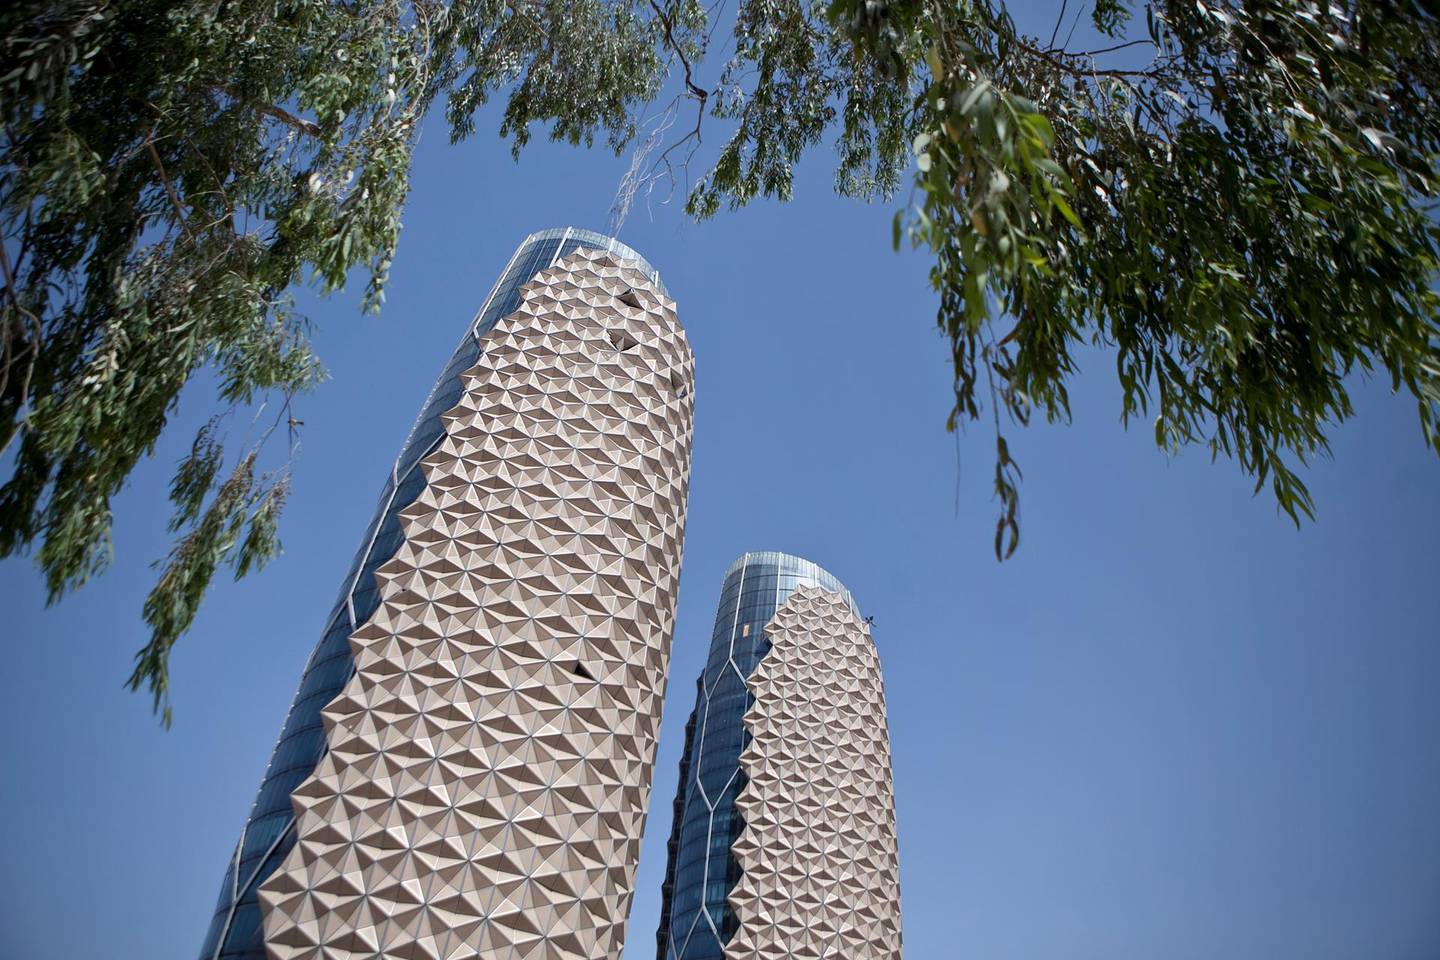 Abu Dhabi, United Arab Emirates, June 12, 2012:   
The Al Bahr Towers in Abu Dhabi use a solar shading system that features a computer-controlled facade made up of thousands of translucent units.  Umbrellas connected to motors open and shut depending on where the sunlight is create an eco friendly building. The towers, on the corner of Saada and Salam Streets in Abu Dhabi will house the offices for the Abu Dhabi Investment Council.  (Silvia Razgova / The National)


     (Note: spelling for the Bahr towers has officially been changed to Bahar - June 12, 2012)